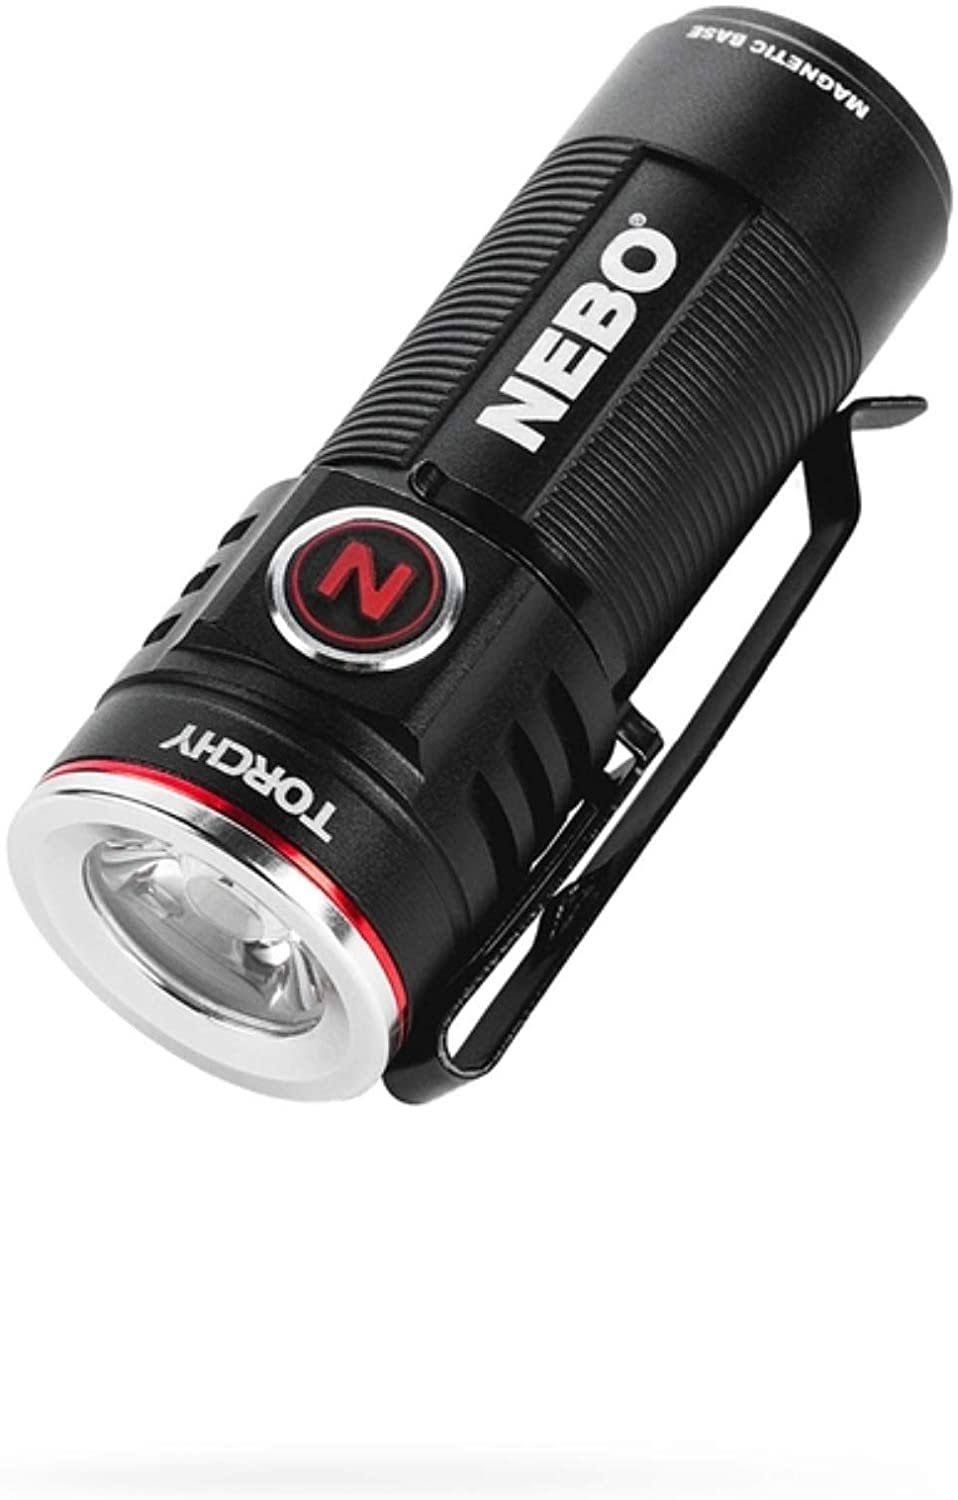 Nebo 1000-Lumen Pocket Sized Flashlight: 4 Light Modes Plus Turbo Mode; Water and Impact Resistant; Power Memory Recall; Rechargeable Battery and